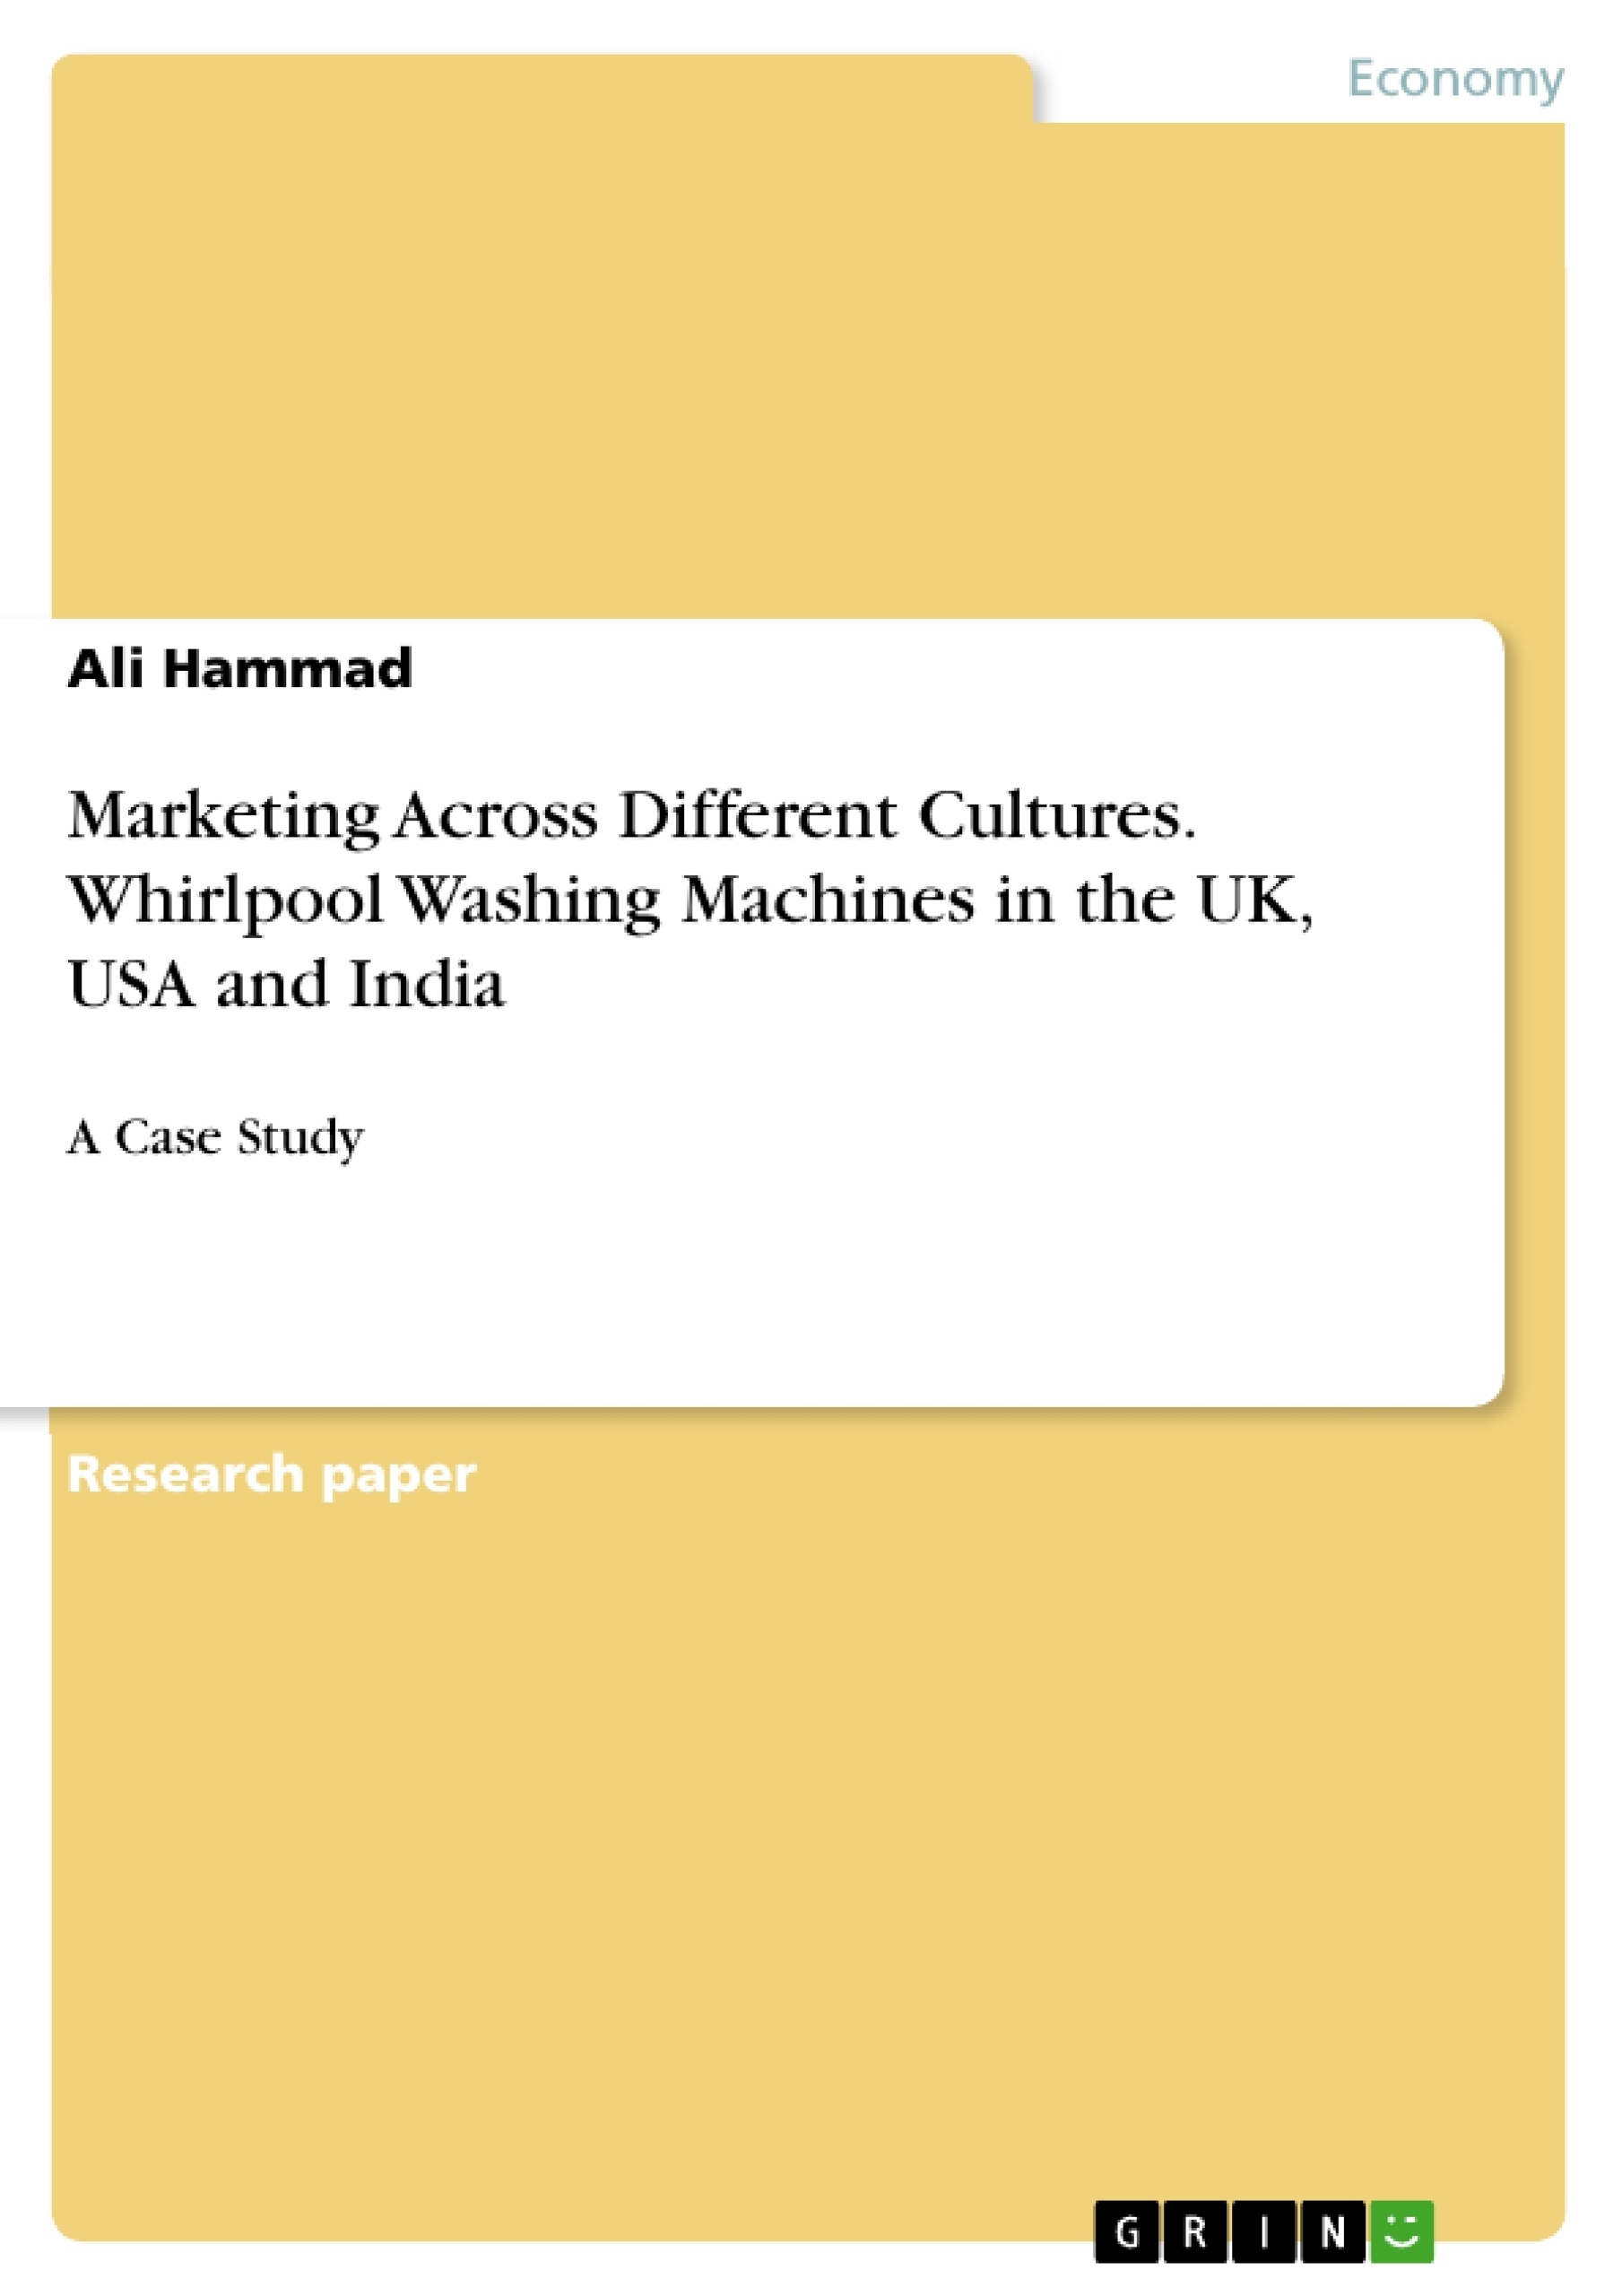 Titel: Marketing Across Different Cultures. Whirlpool Washing Machines in the UK, USA and India